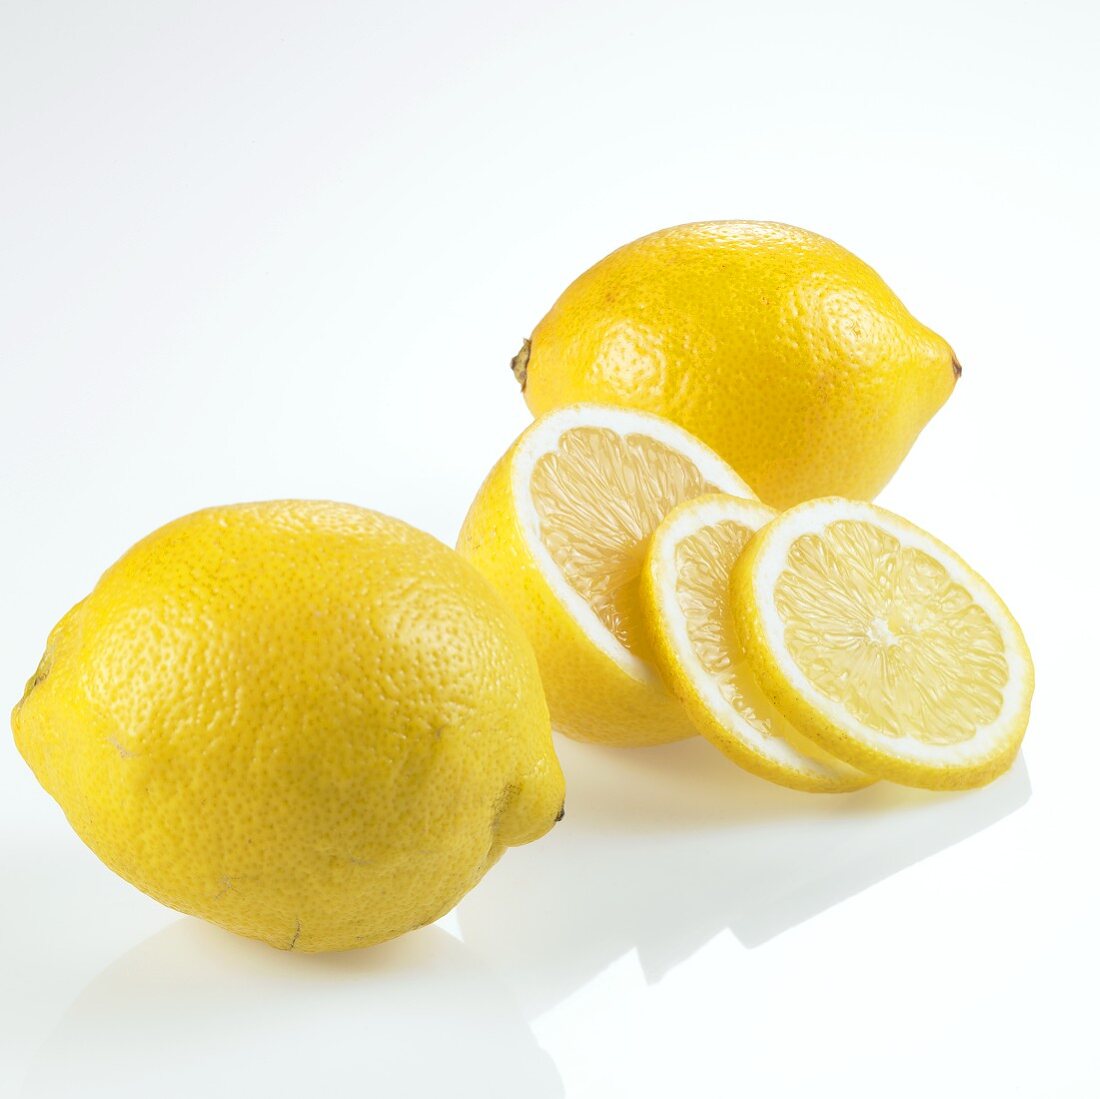 Lemons, whole, half and slices